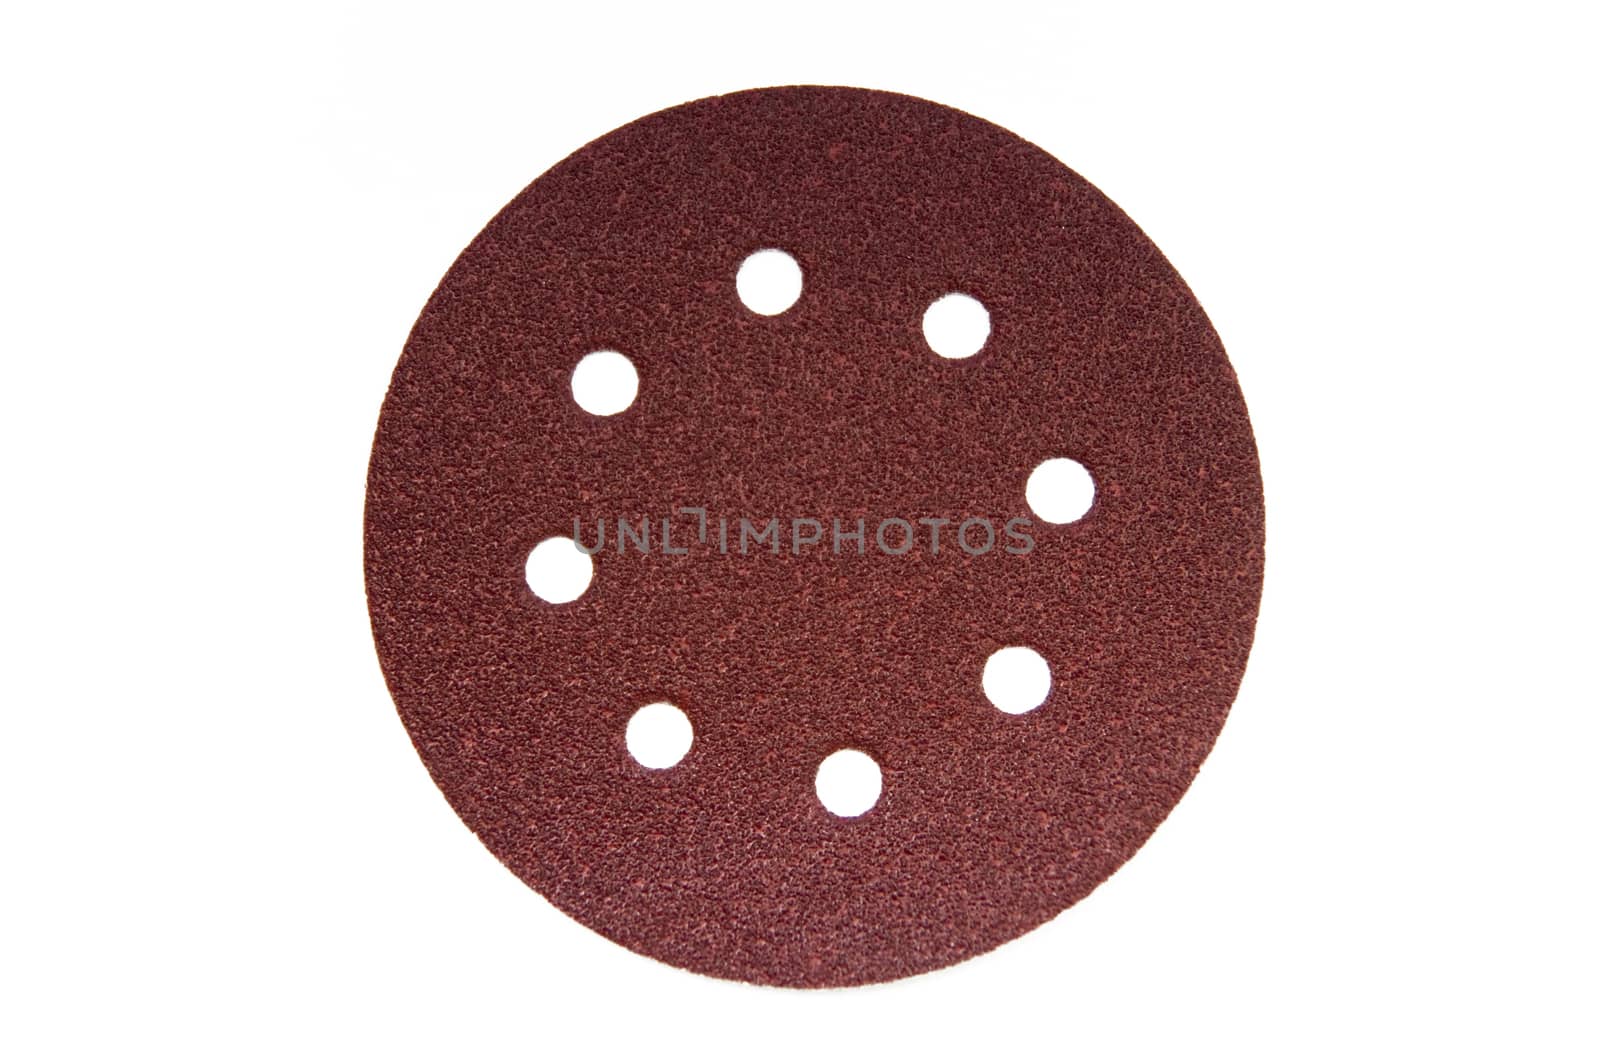 sandpaper with holes isolated on white background